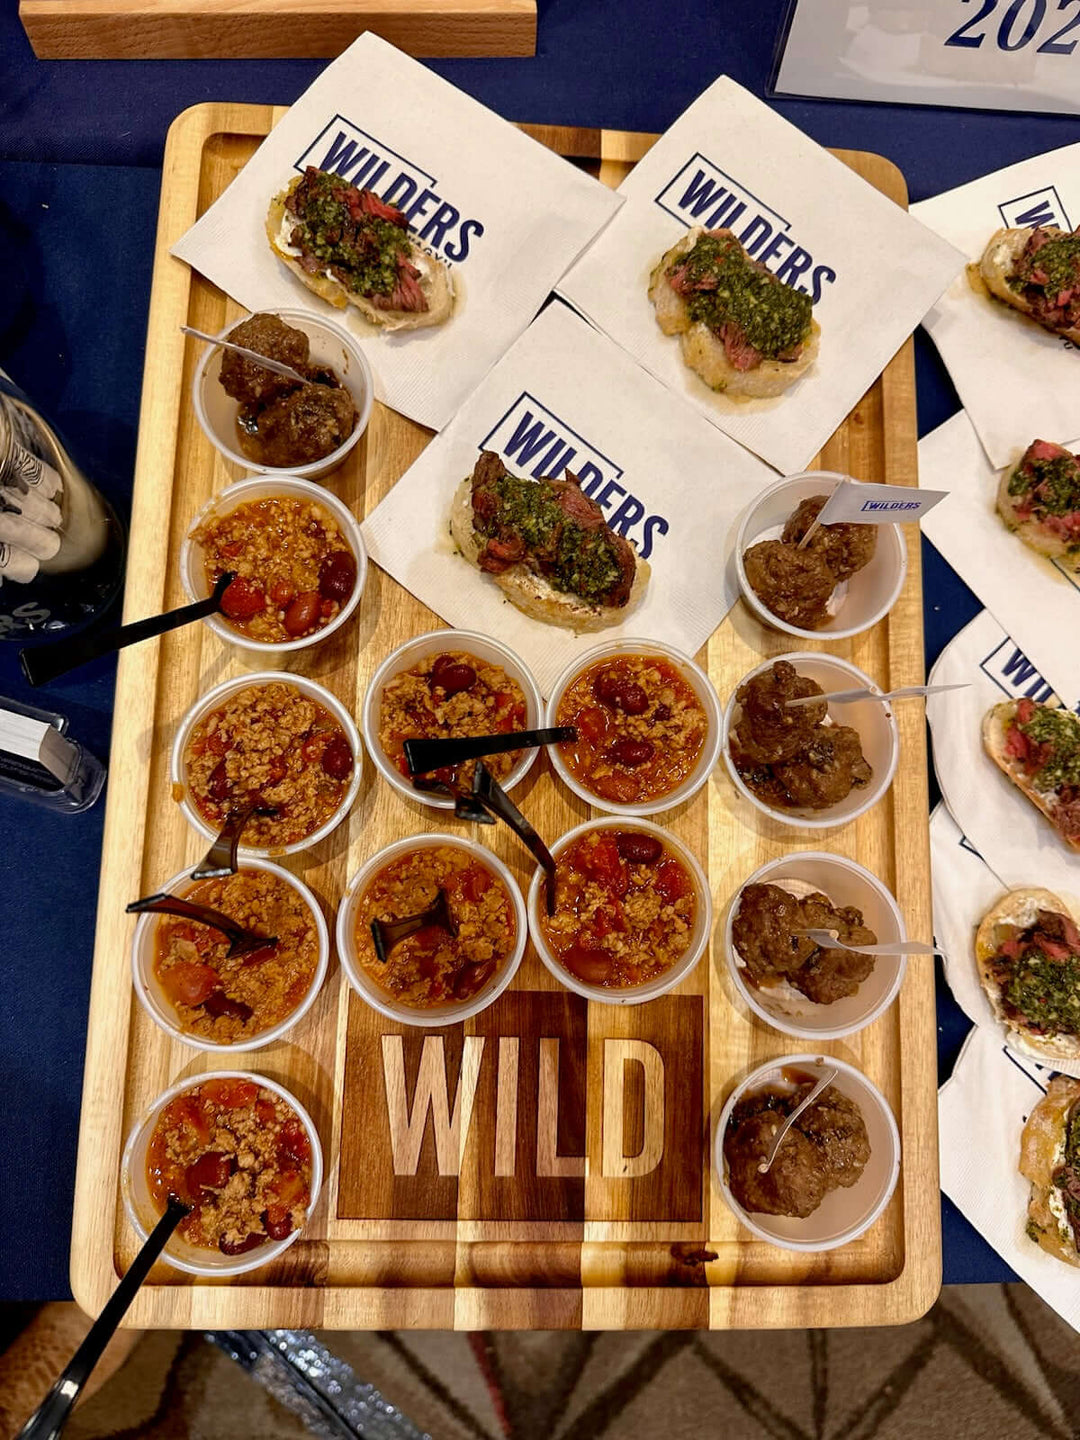 Wilders Pasture-Raised Meats Featured at the Flavors of the Carolinas Show 2023